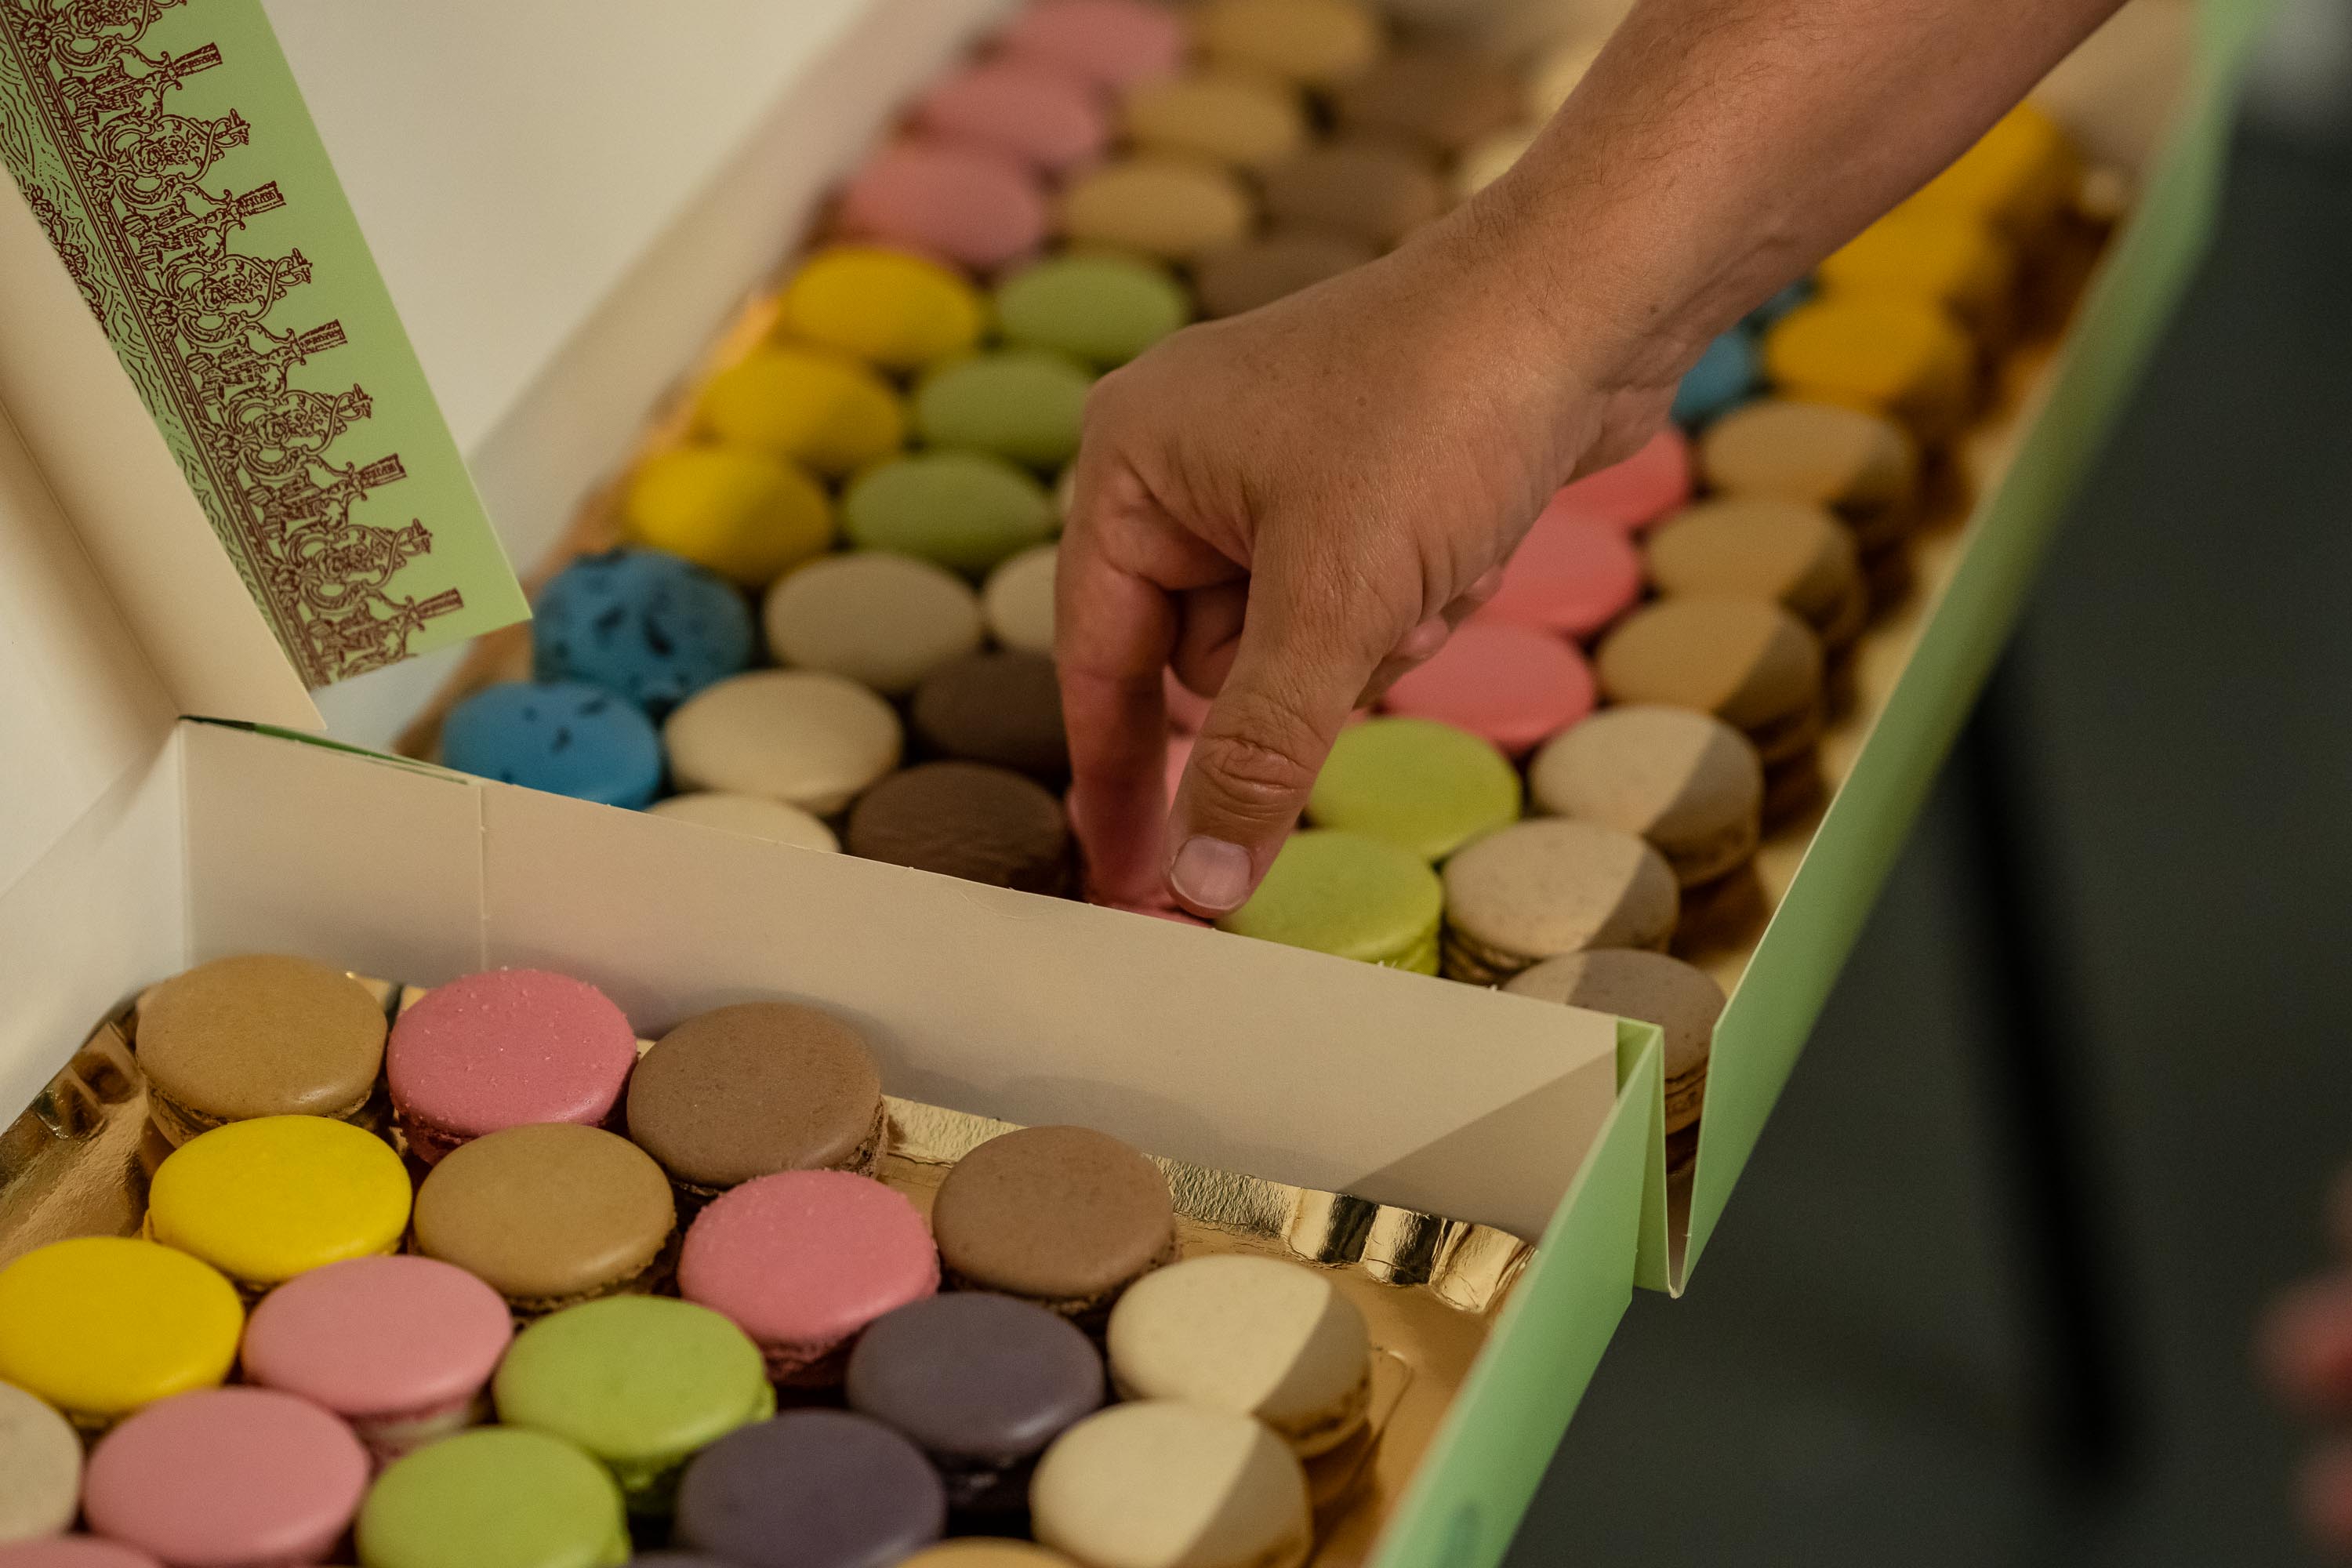 What’s a trip to Paris without savoring some iconic Parisian macarons